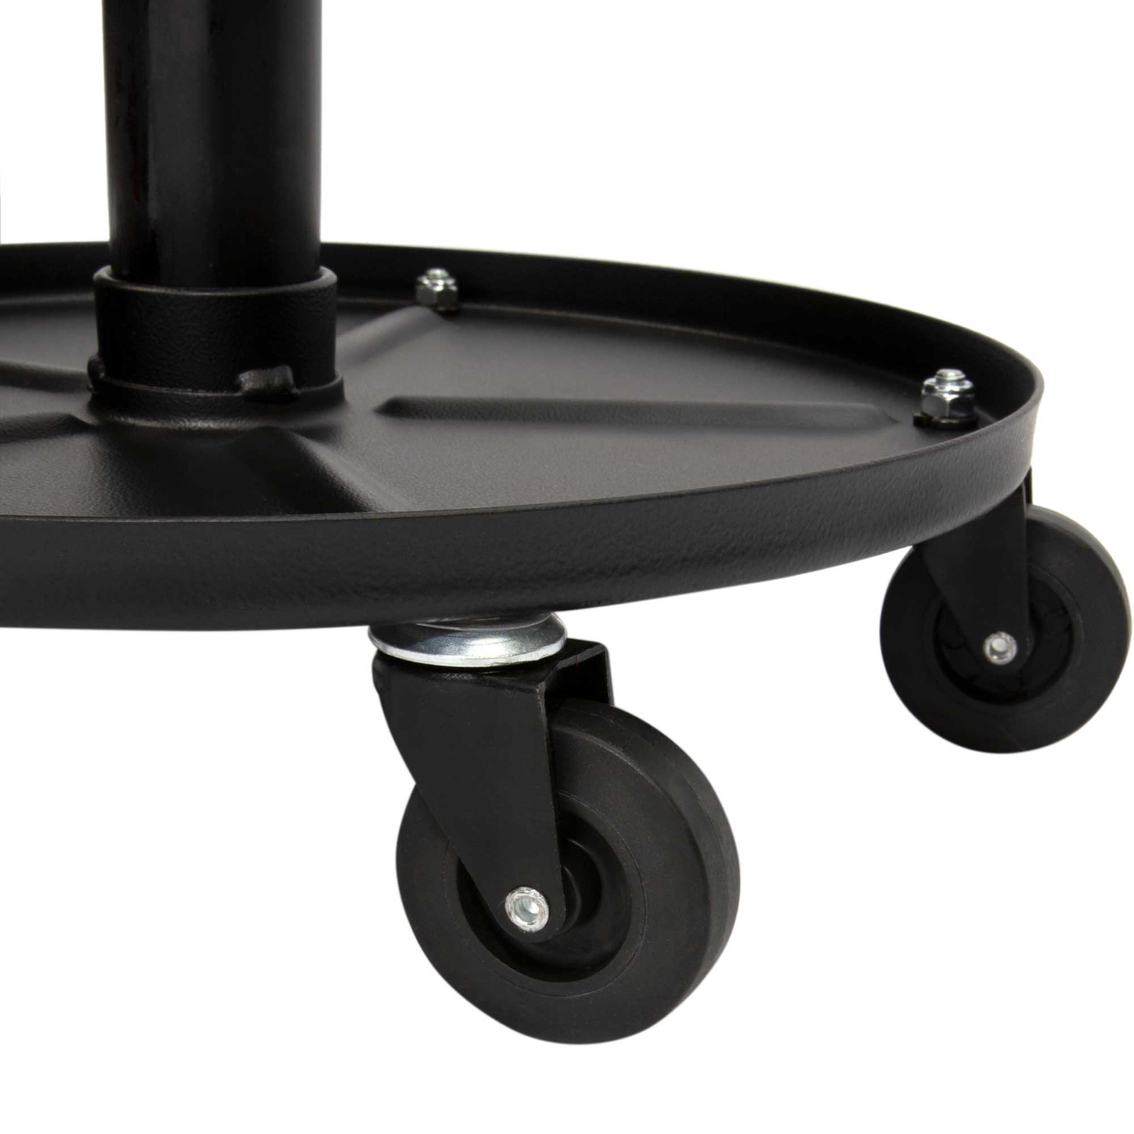 Adjustable Height Rolling Creeper Stool with Storage Tray - Image 4 of 6